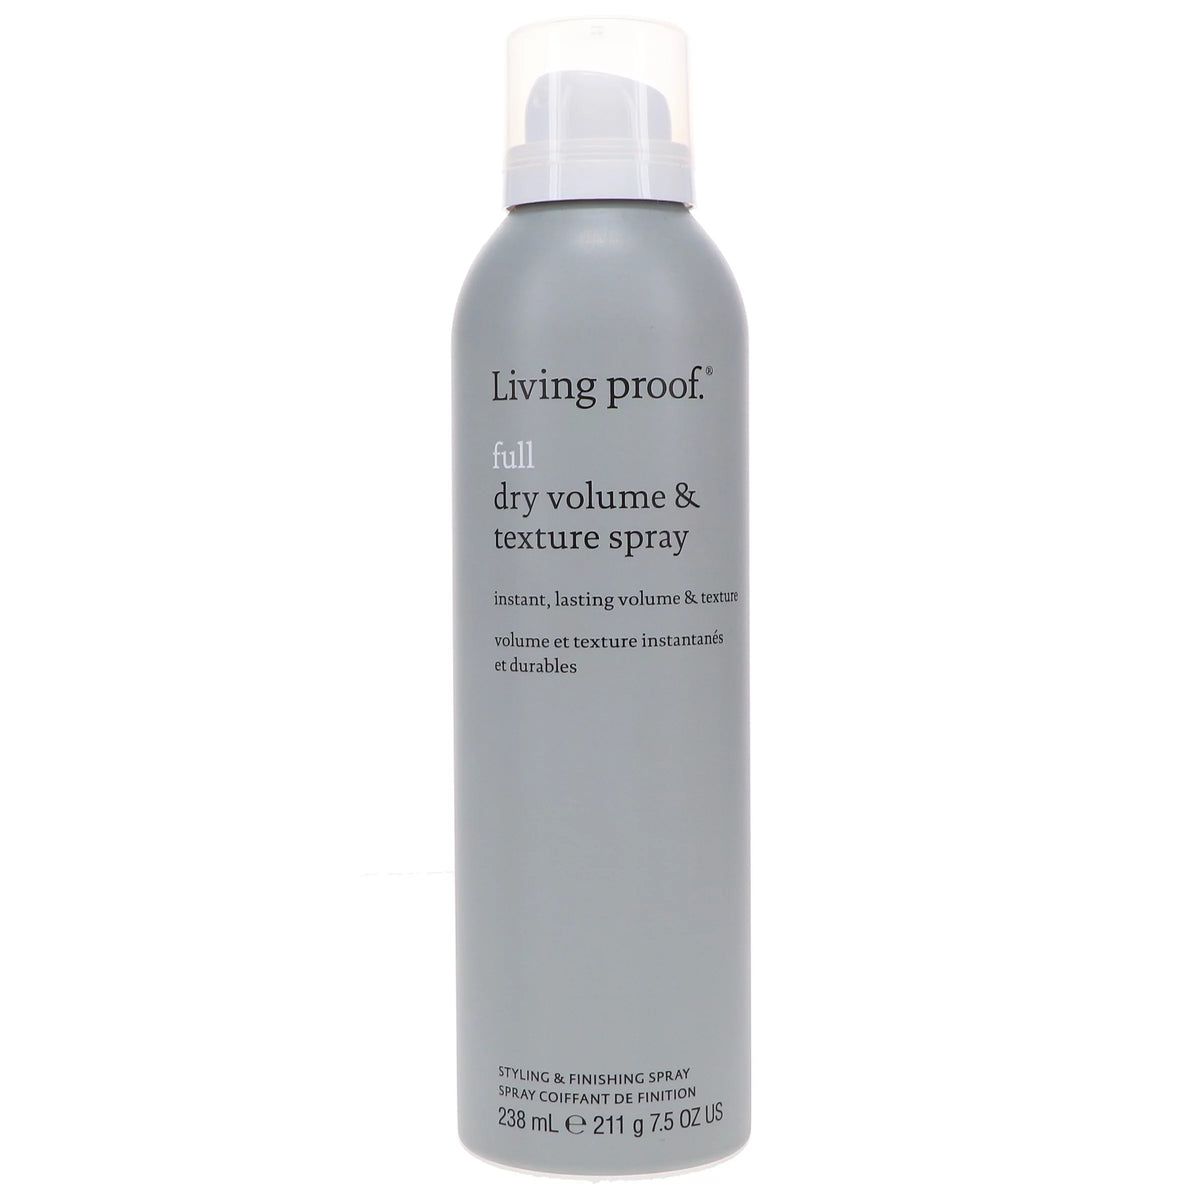 Living proof - Full Dry Volume & Texture Spray | NewCo Beauty